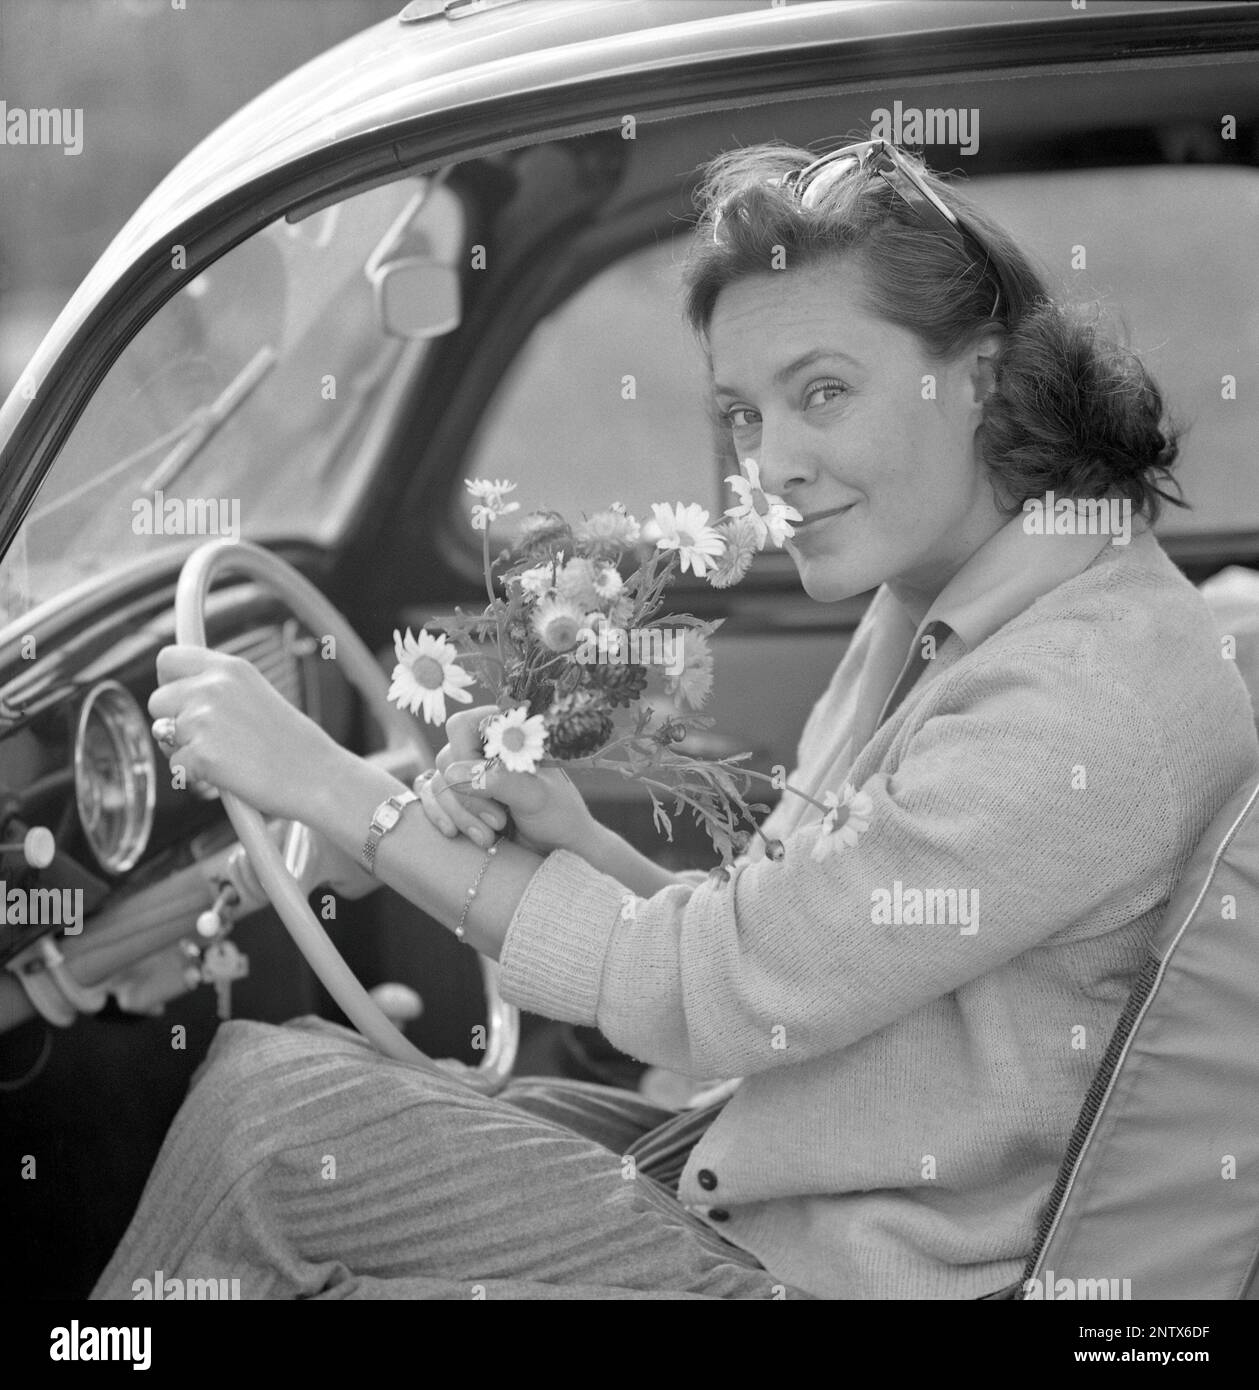 In the 1960s. Actress Gaby Stenberg looks happy this summer day at the steering wheel and driving sear of her Volkswagen beetle car. Sweden 1960 Conard ref 4232 Stock Photo